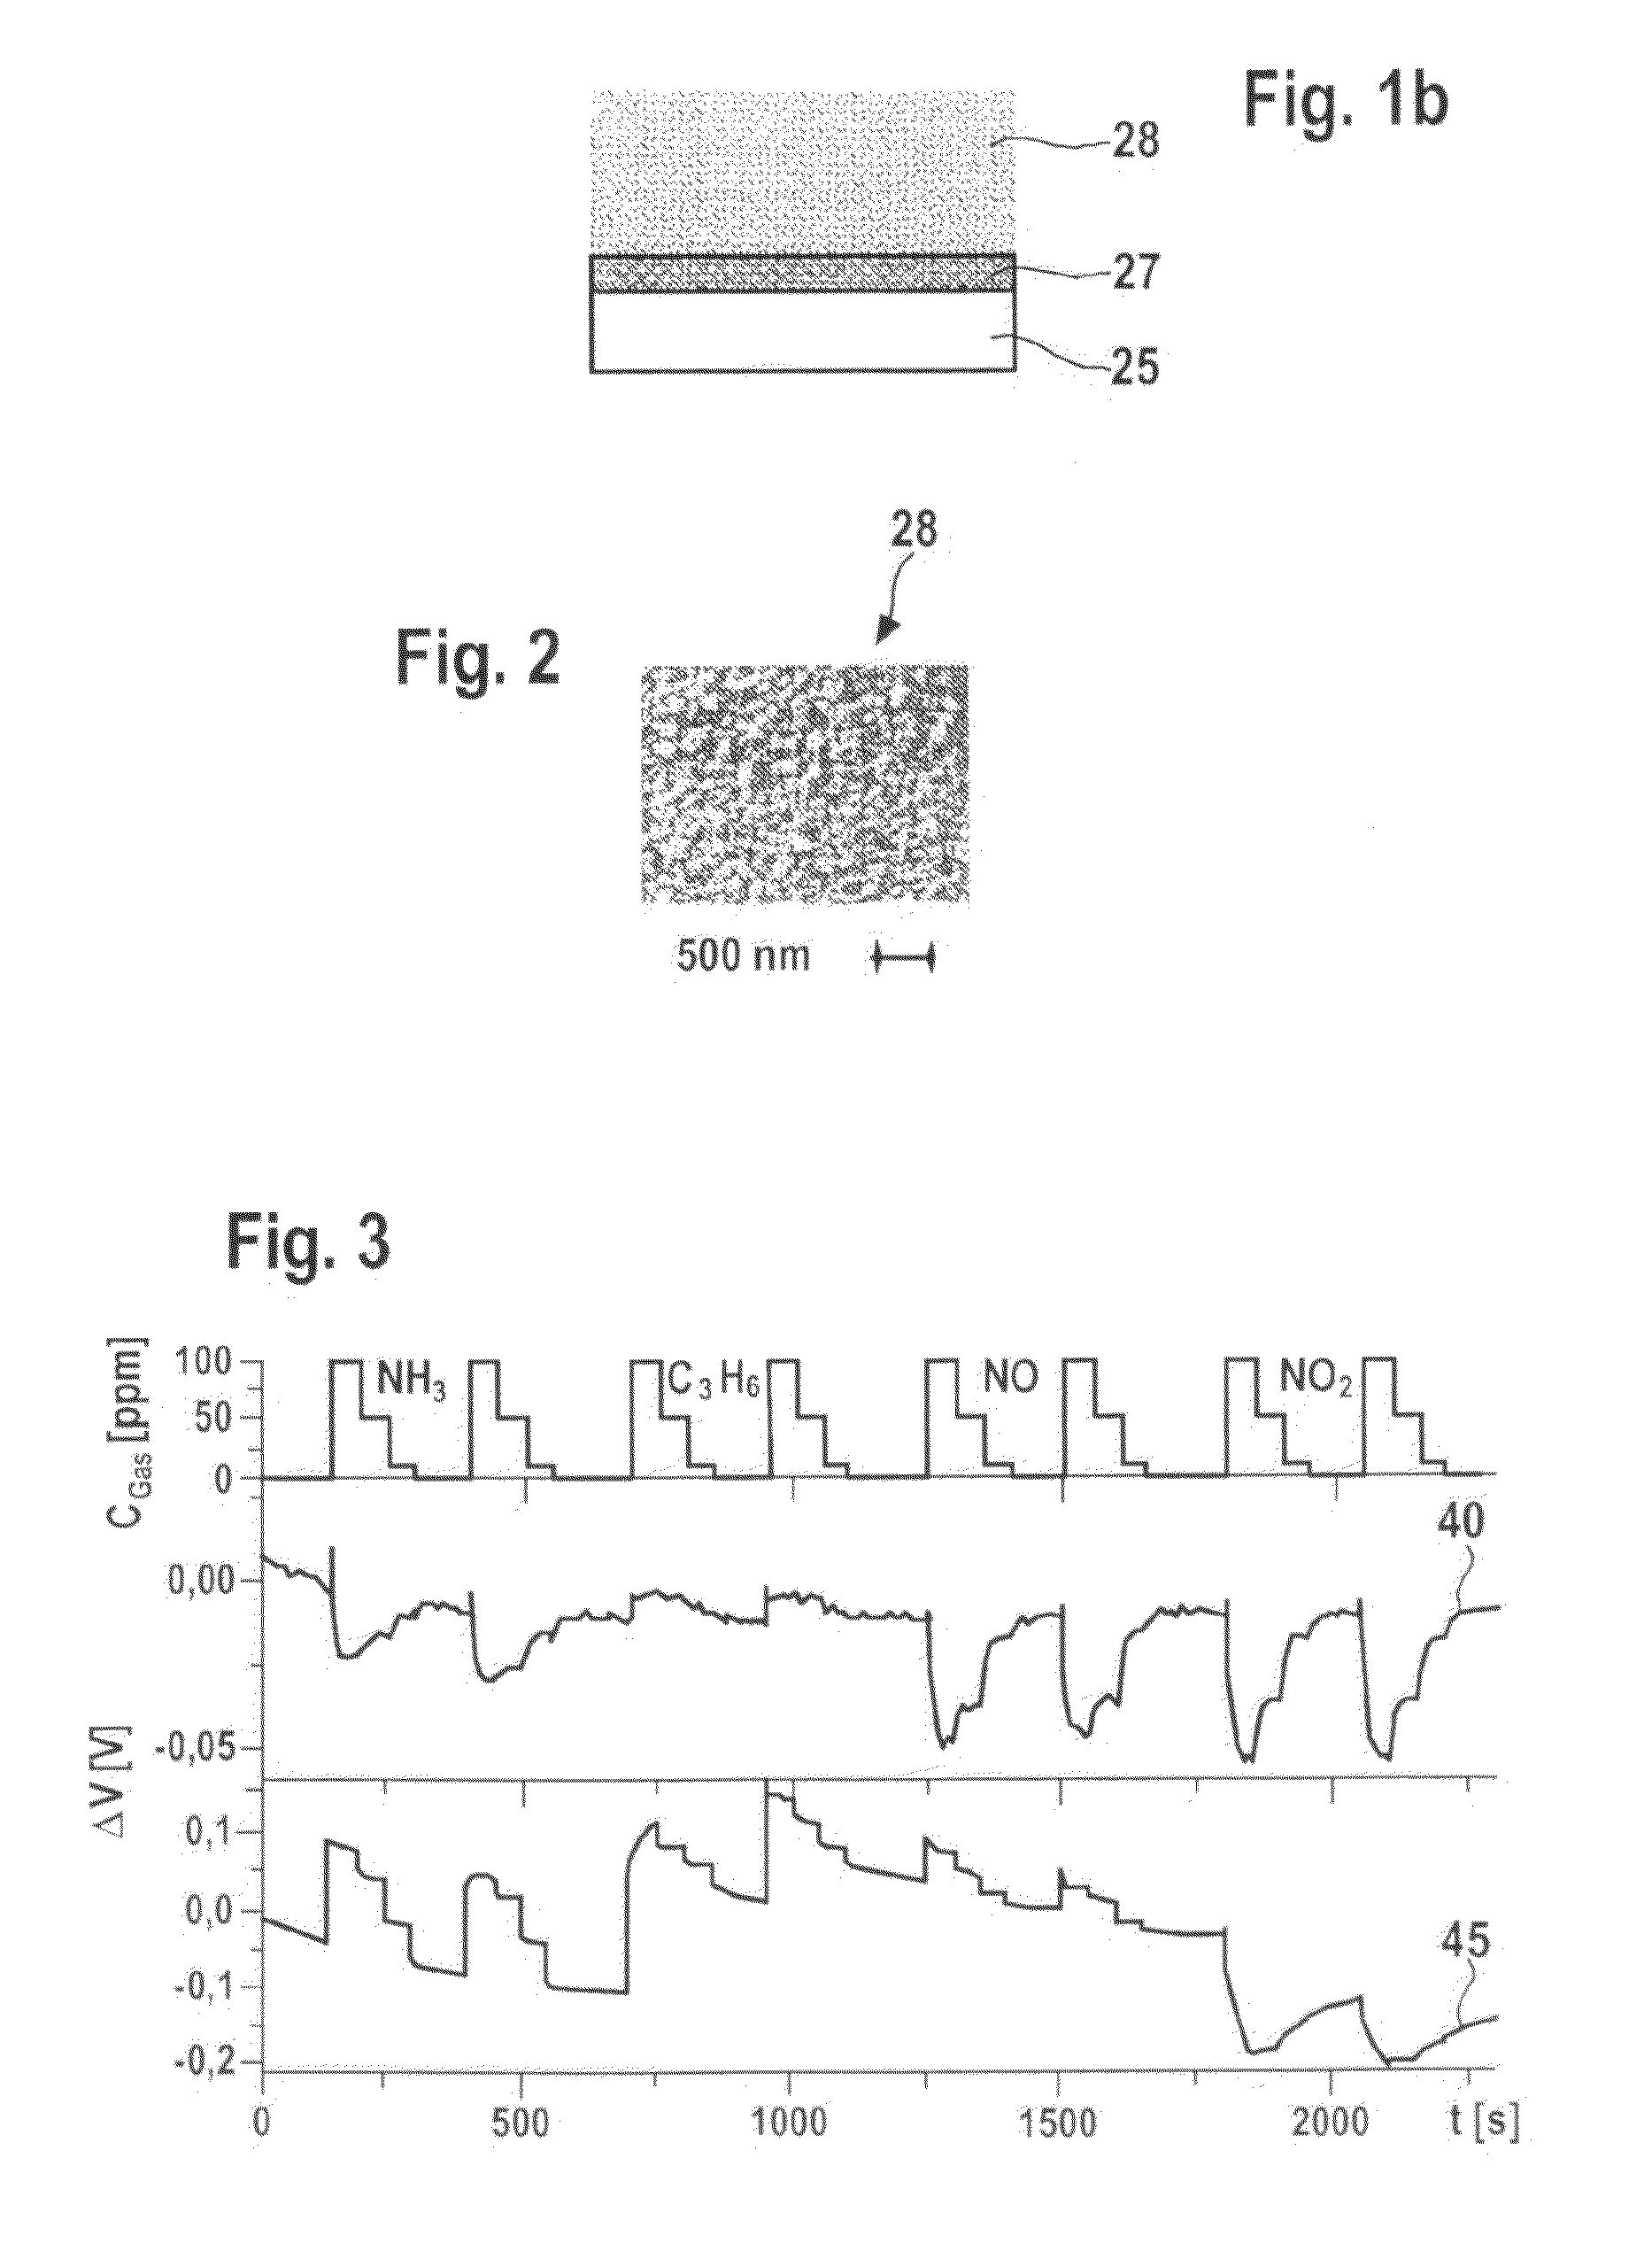 Field effect transistor gas sensor having a housing and porous catalytic material containaed therein